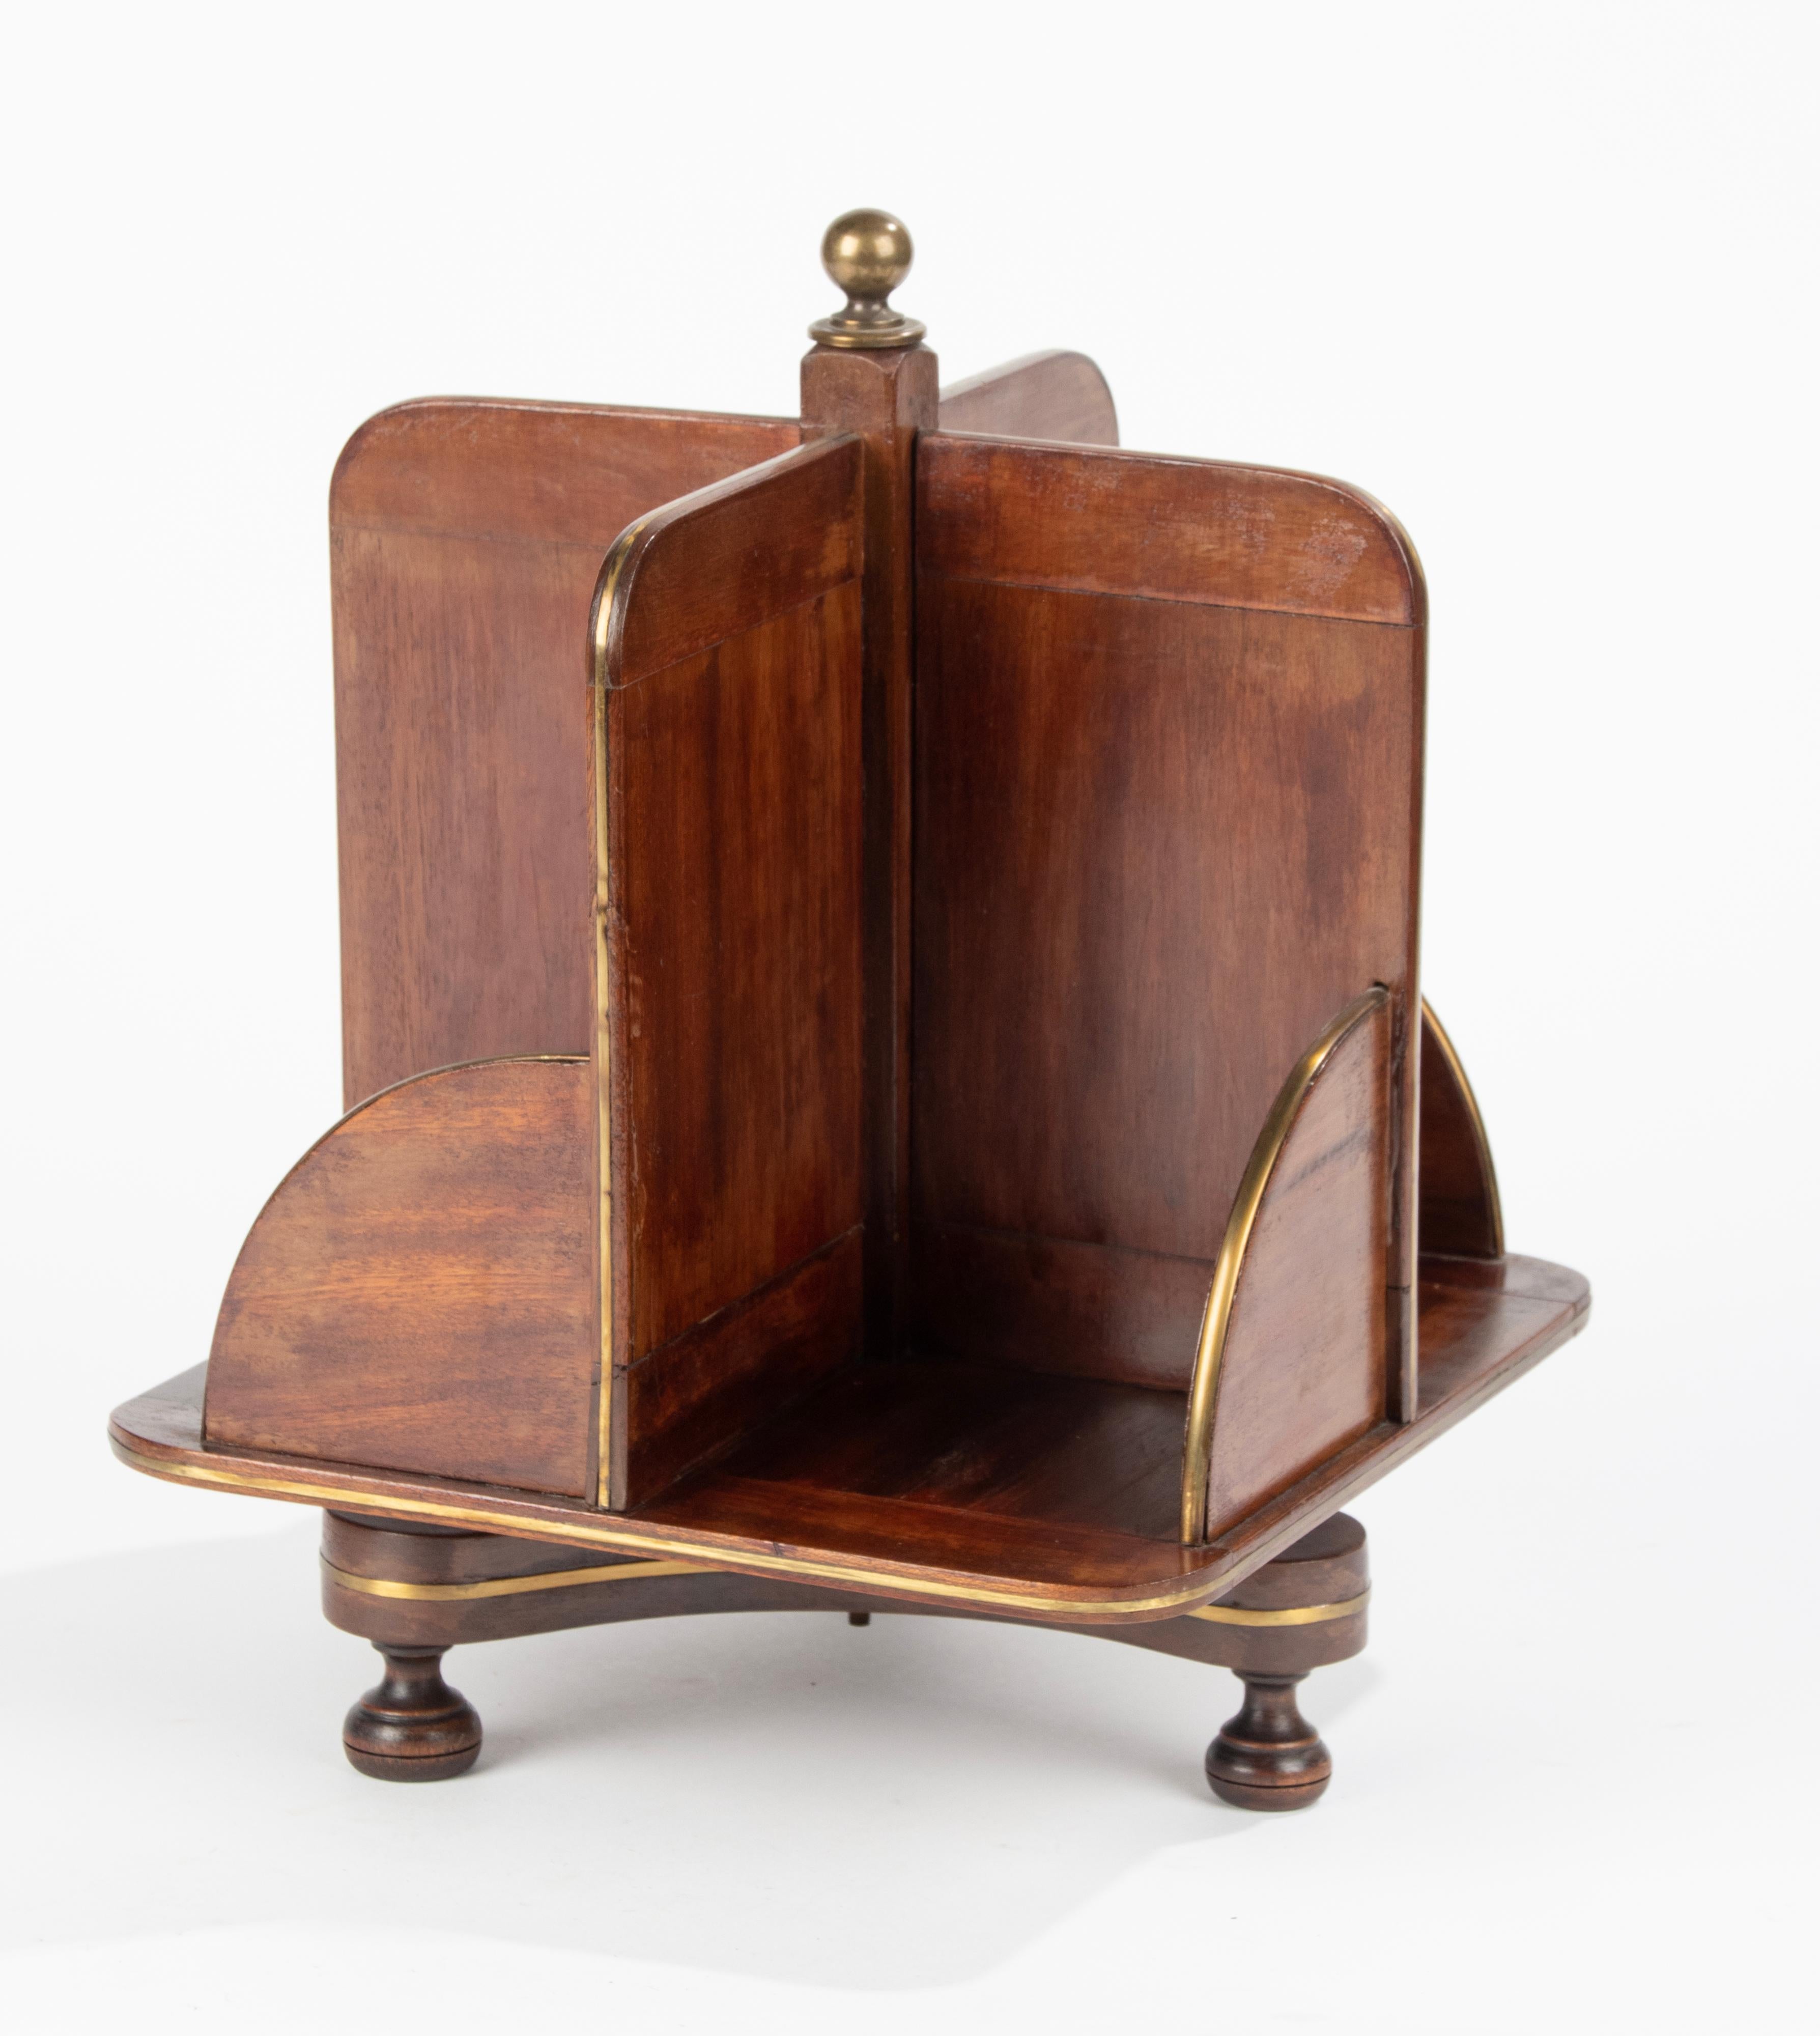 An antique rotating small book mill for your desk, including the small books. The book mill is made of mahogany wood with brass inlays. Including small books. Made in France circa 1870-1880